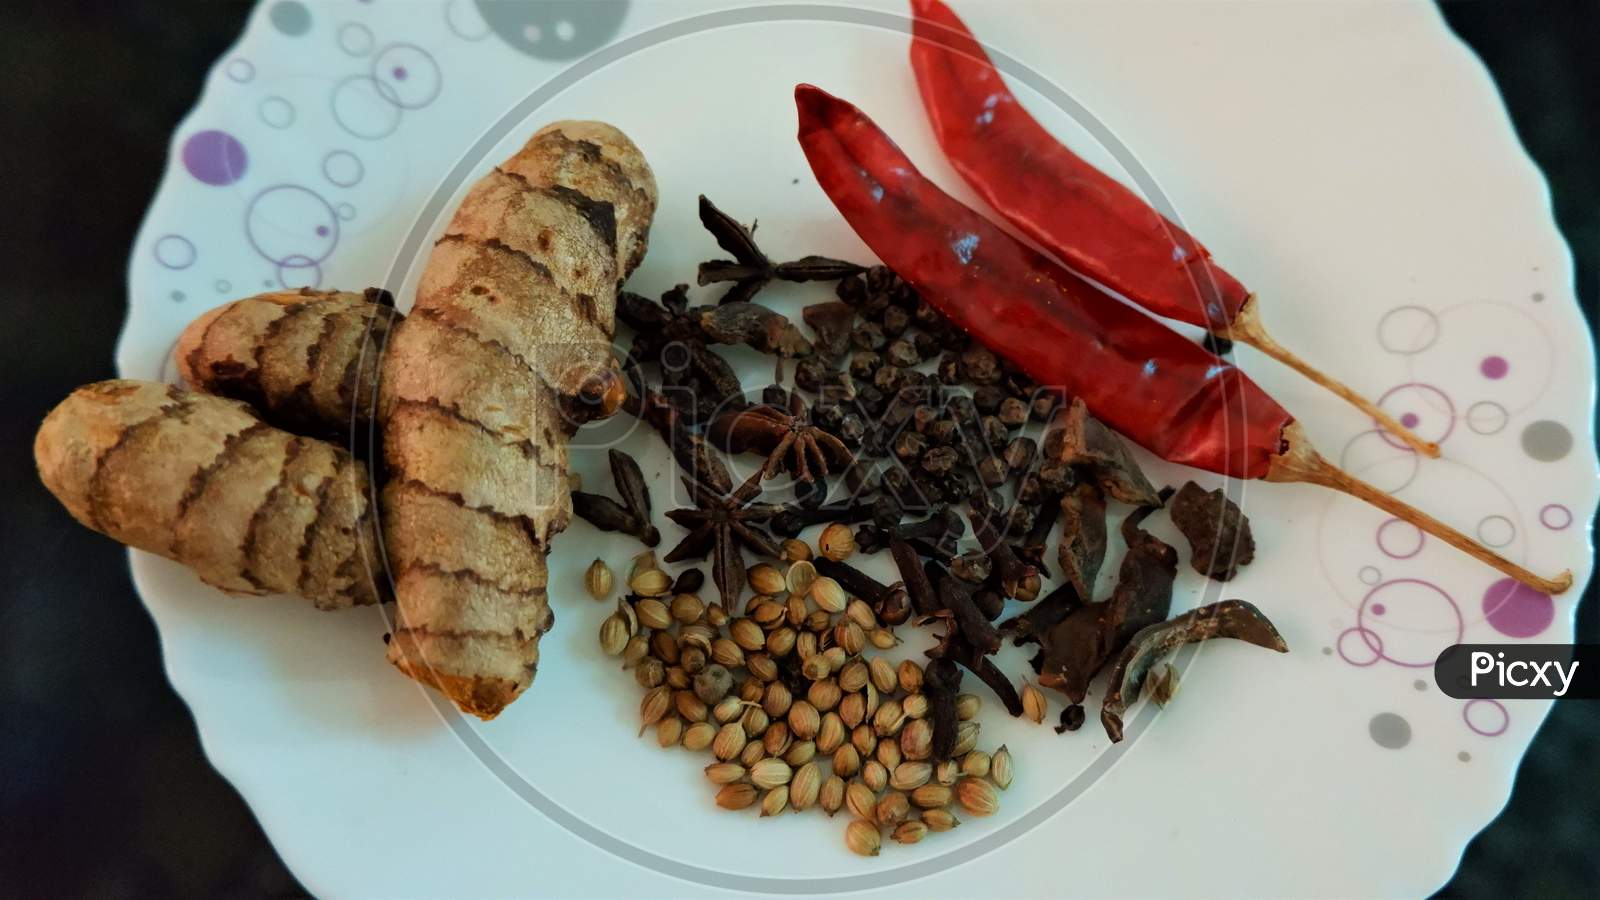 Indian kerala spices on the plate